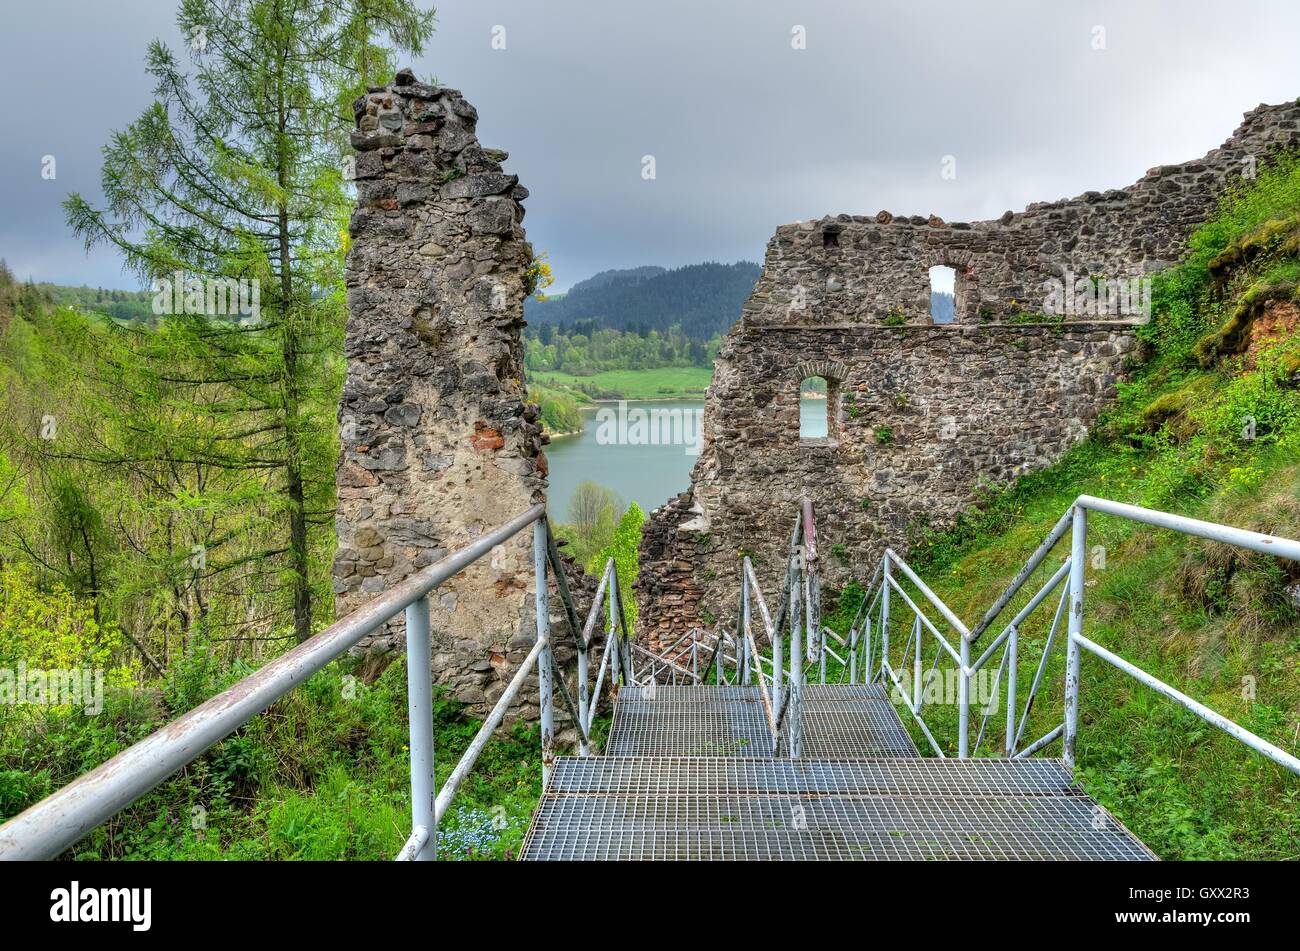 The ruins of the old castle with river  green hills in the background. Stock Photo